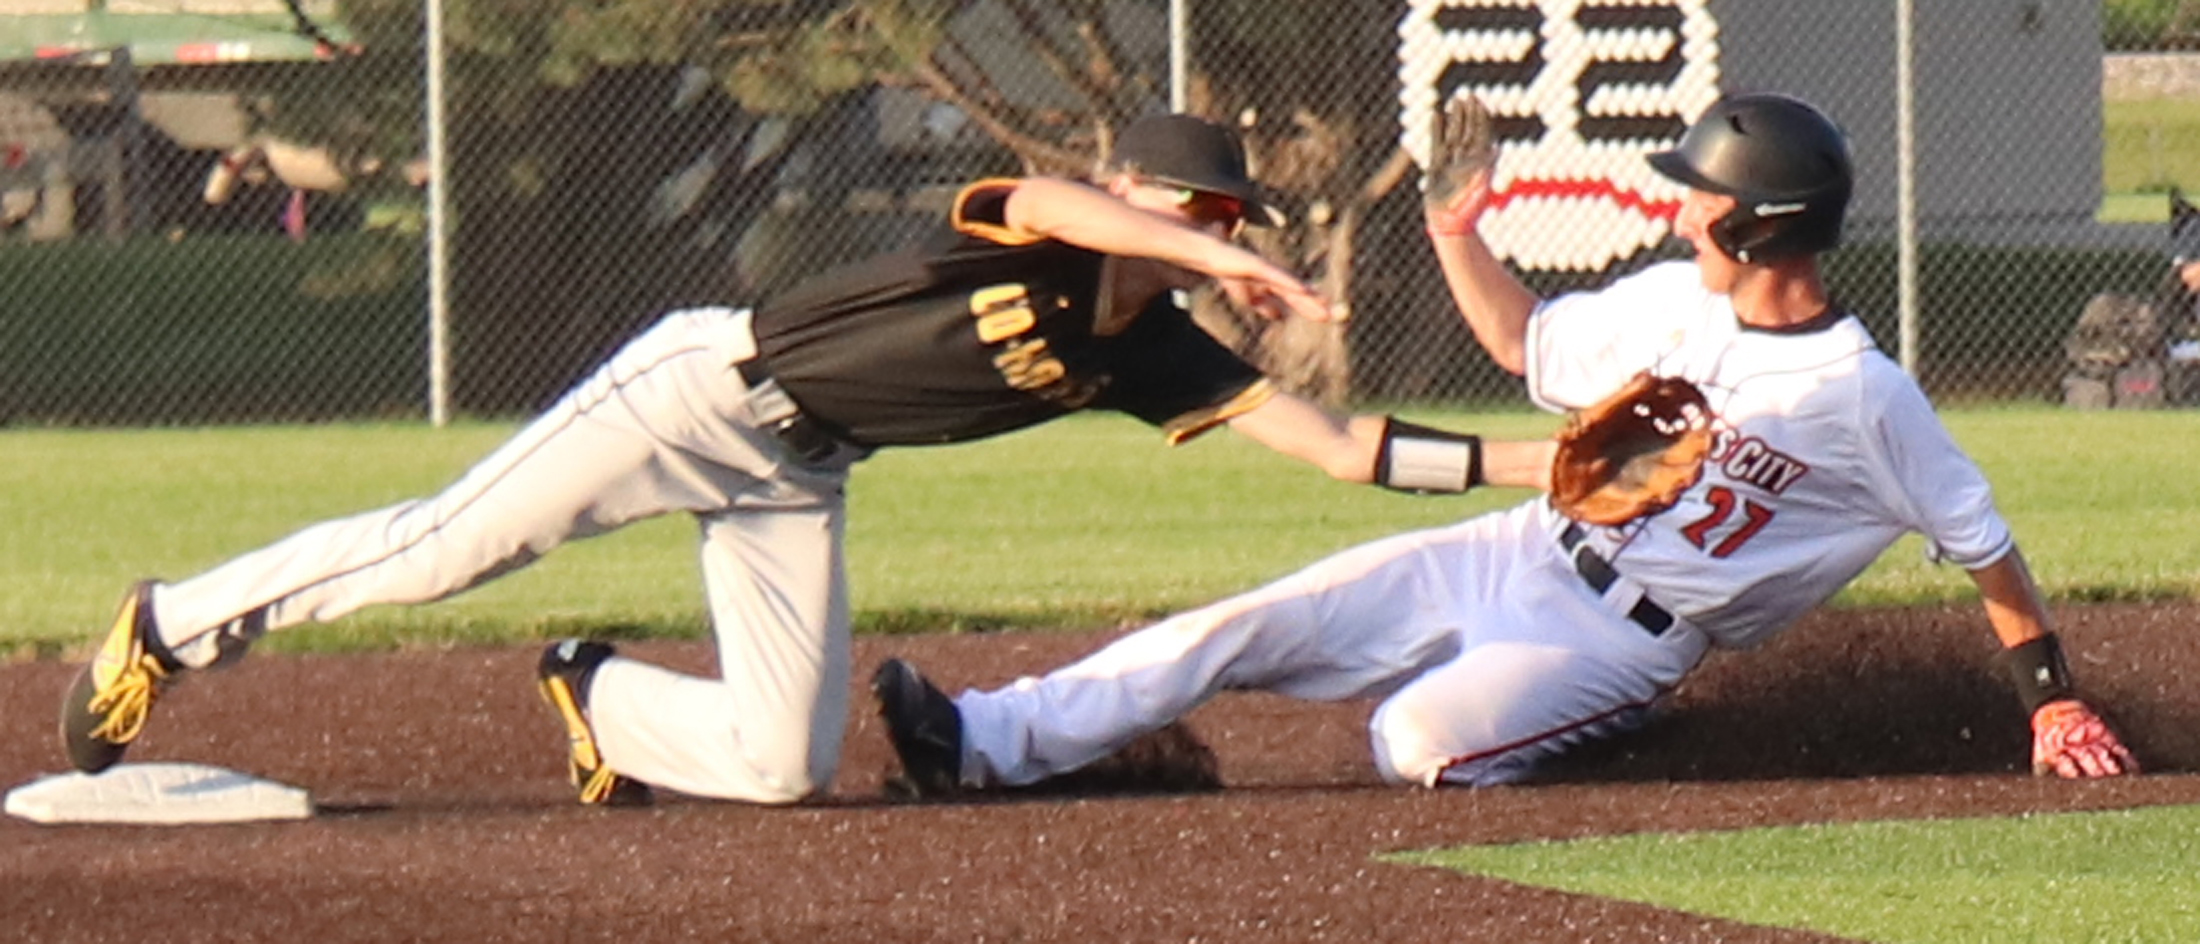 Comet come up 1 run short in chasing down Go-Hawks